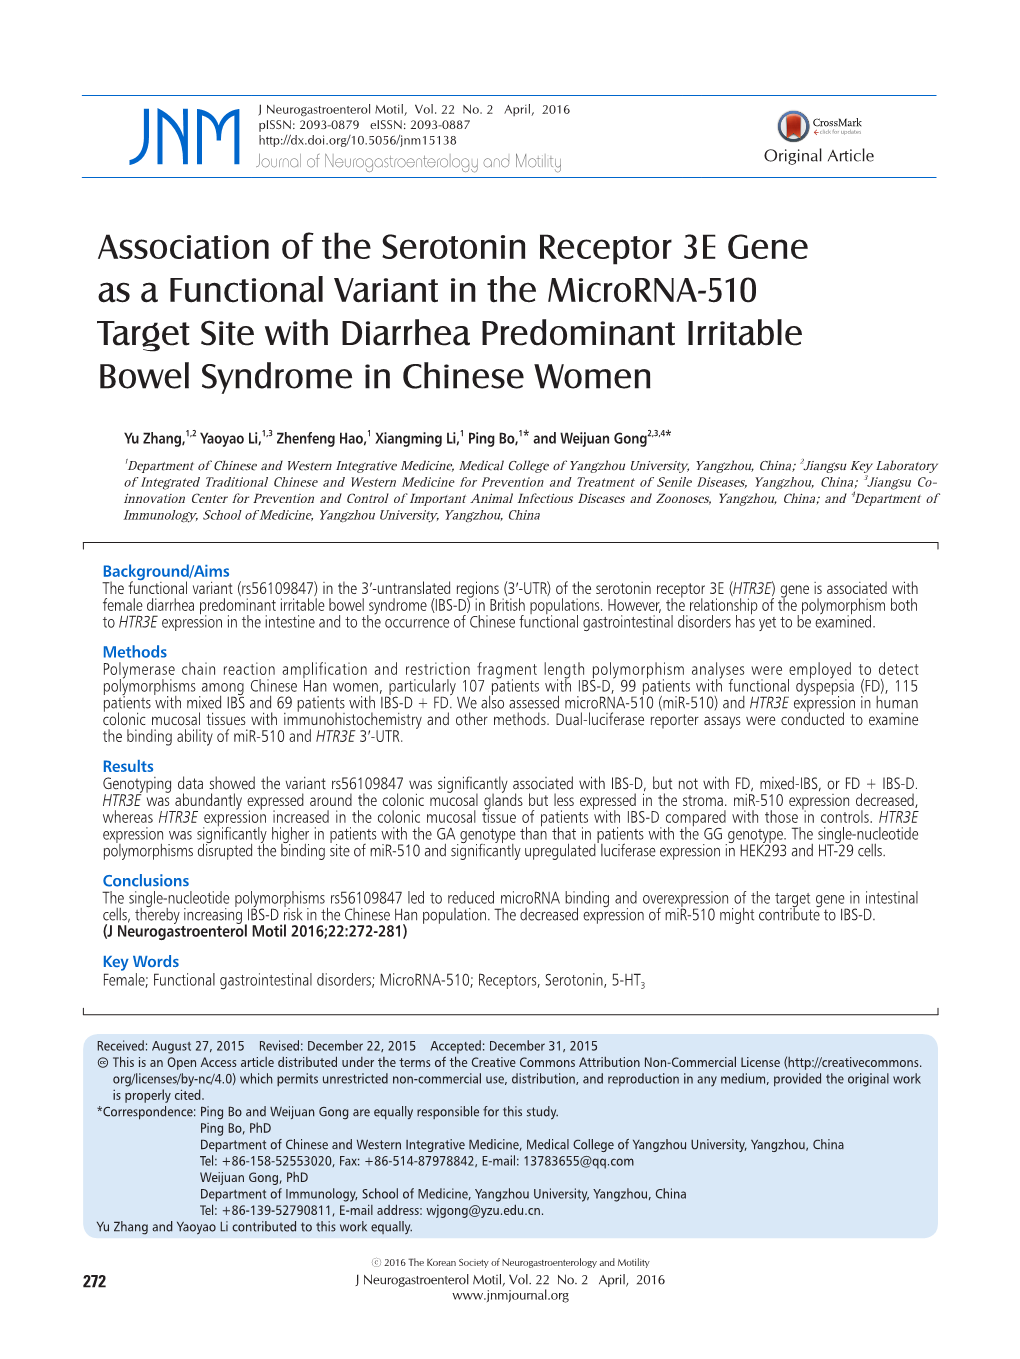 Association of the Serotonin Receptor 3E Gene As a Functional Variant In